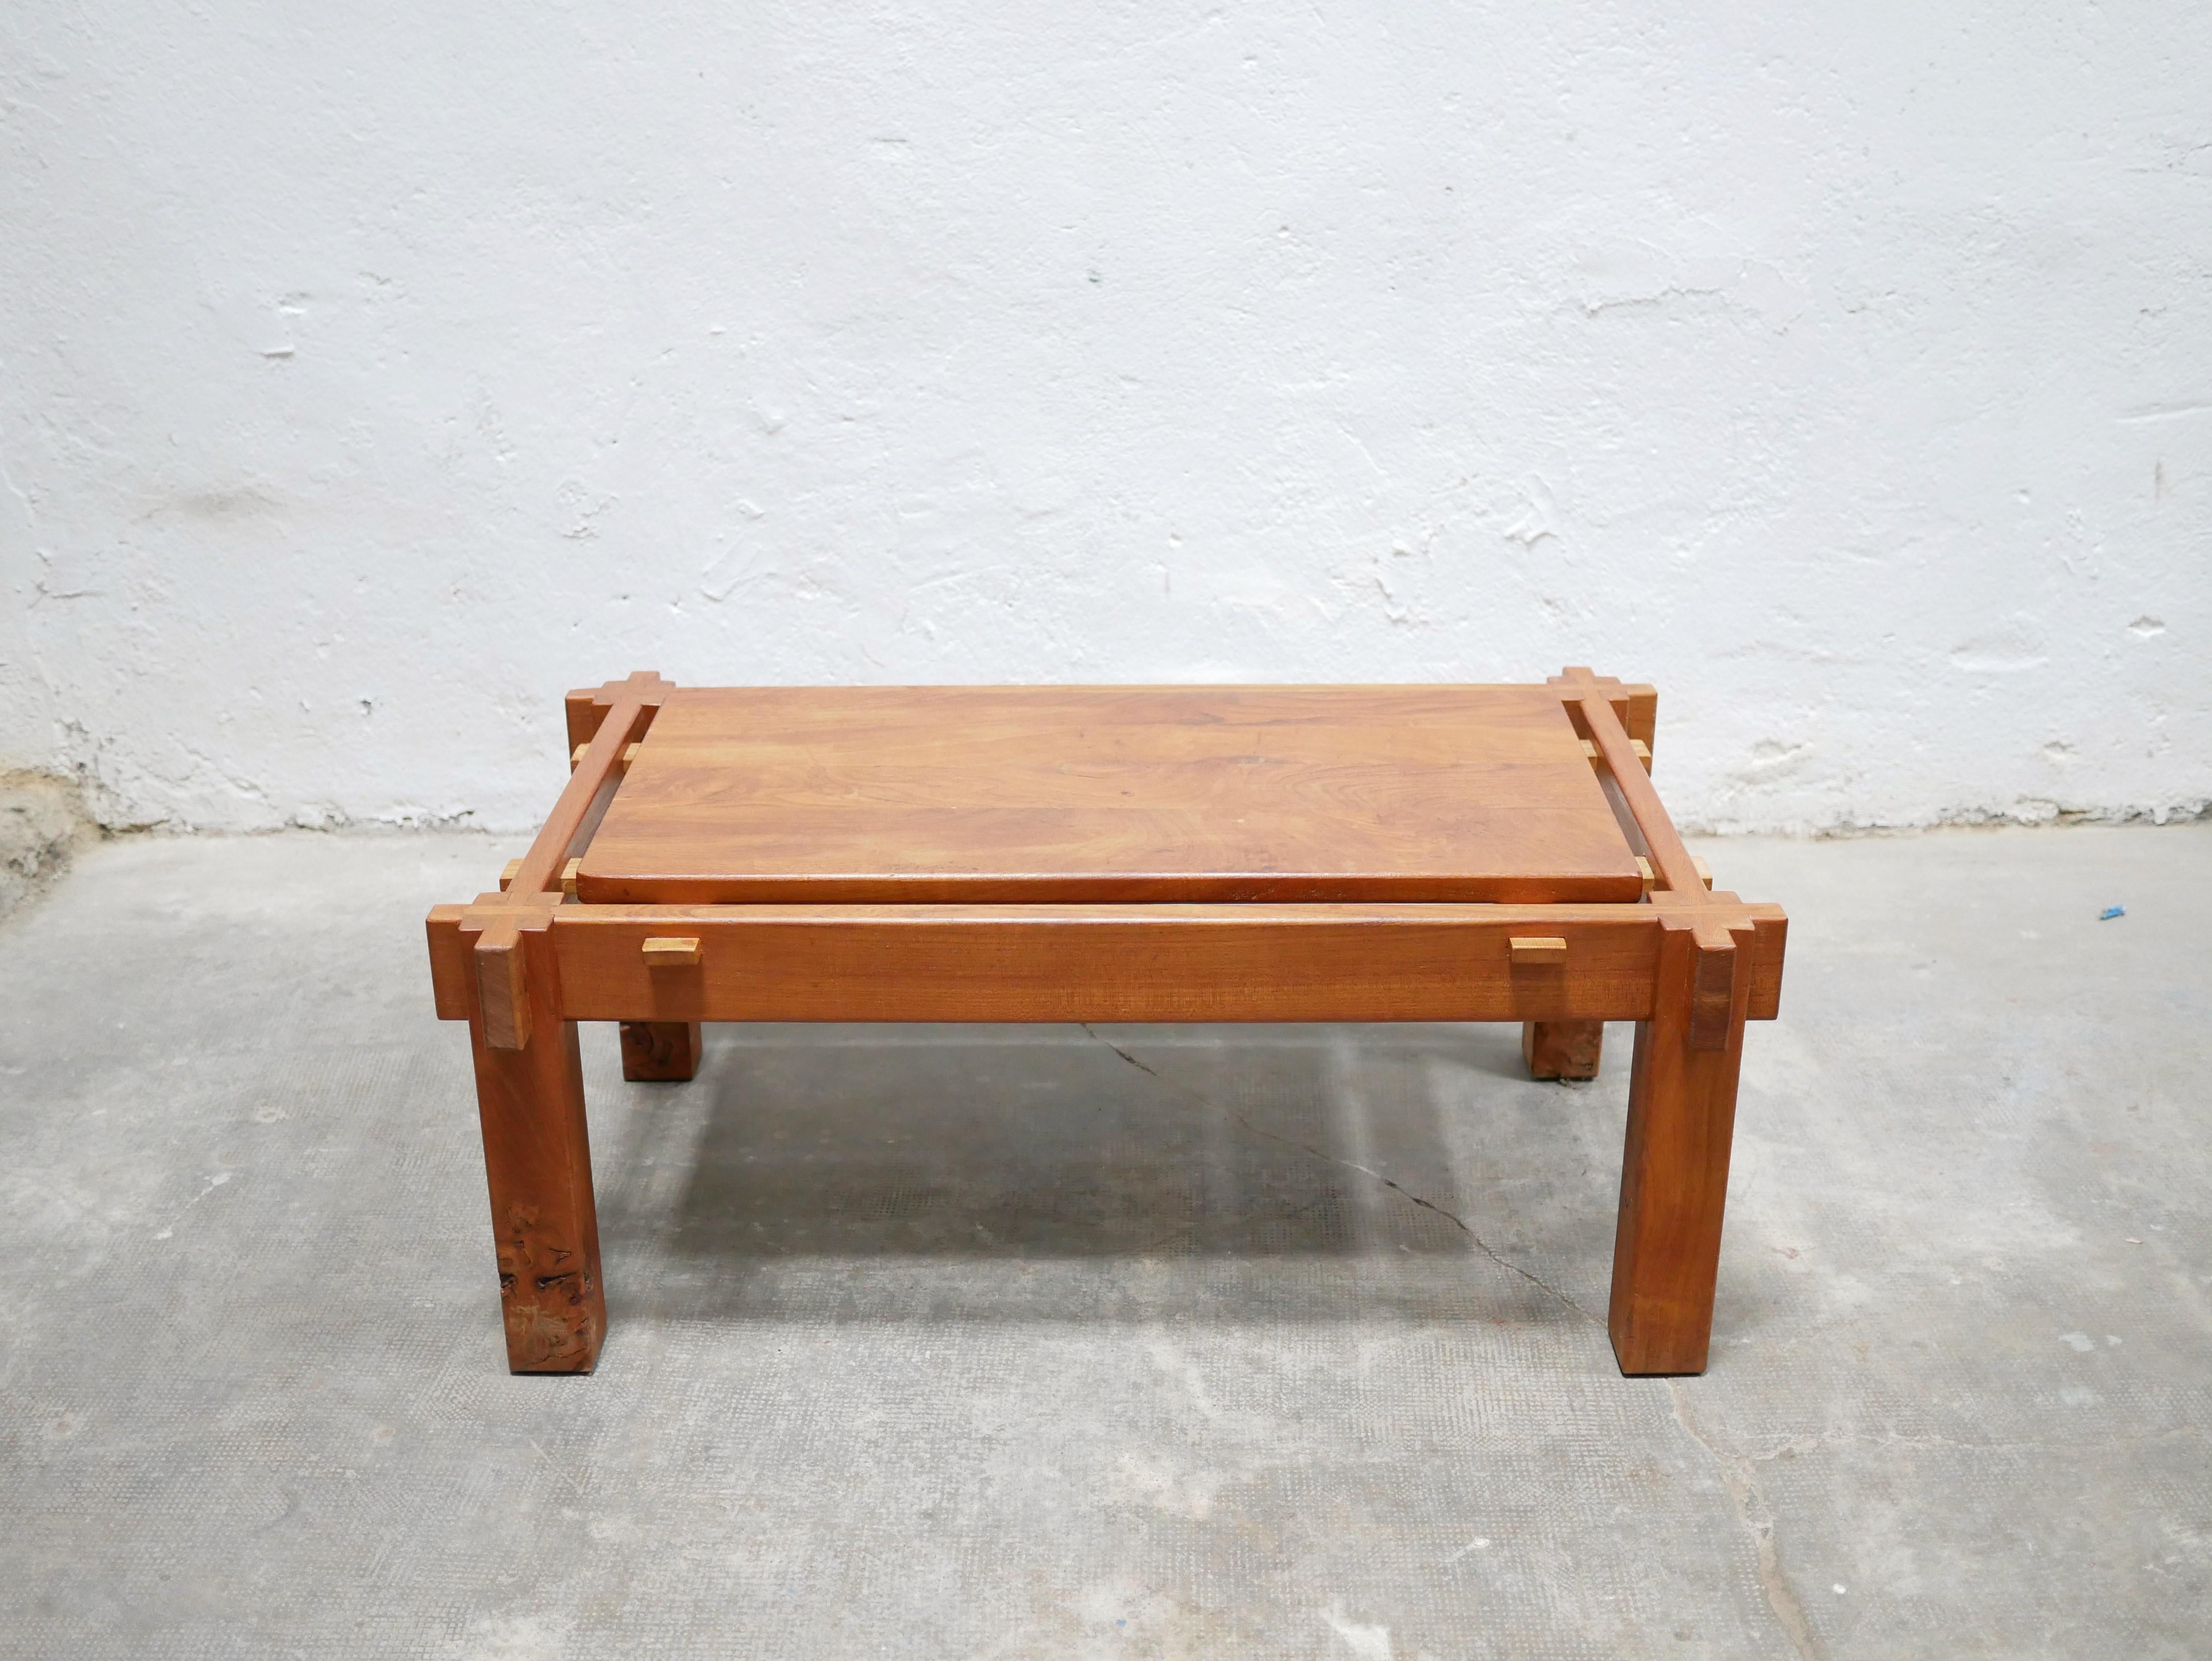 Solid elm coffee table from the 60s.

Of good size, aesthetic and practical, the coffee table will be perfect in a current decoration. Minimalist lines with timeless charm.
Elm wood with a pretty grain, its color is bright and warm.
Very good